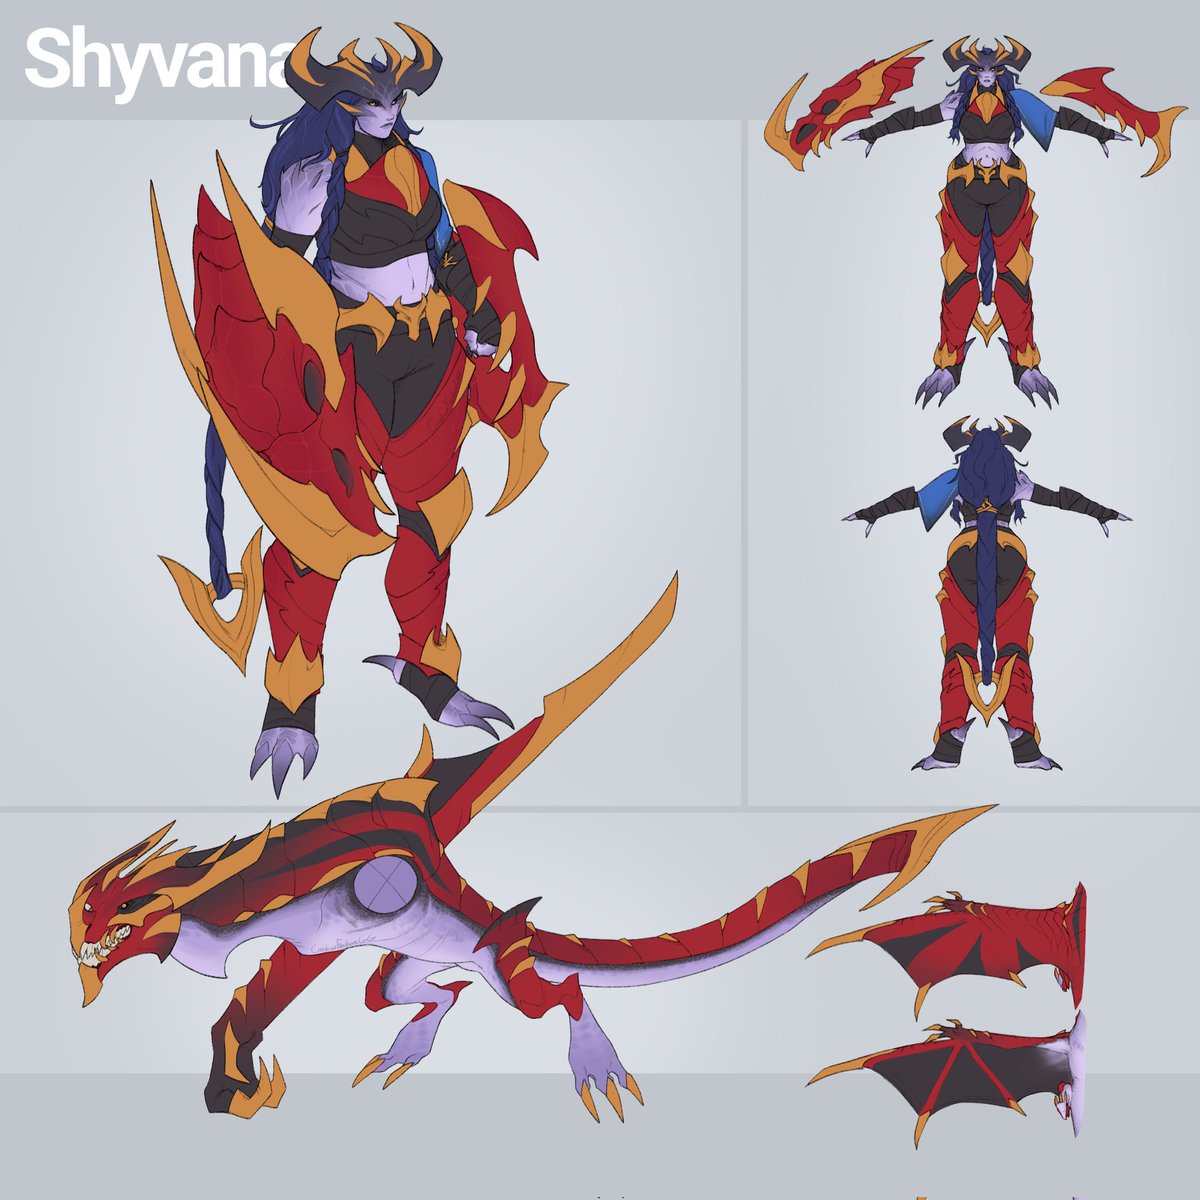 Shyvana League of Legends redesign since apparently she's getting one :)